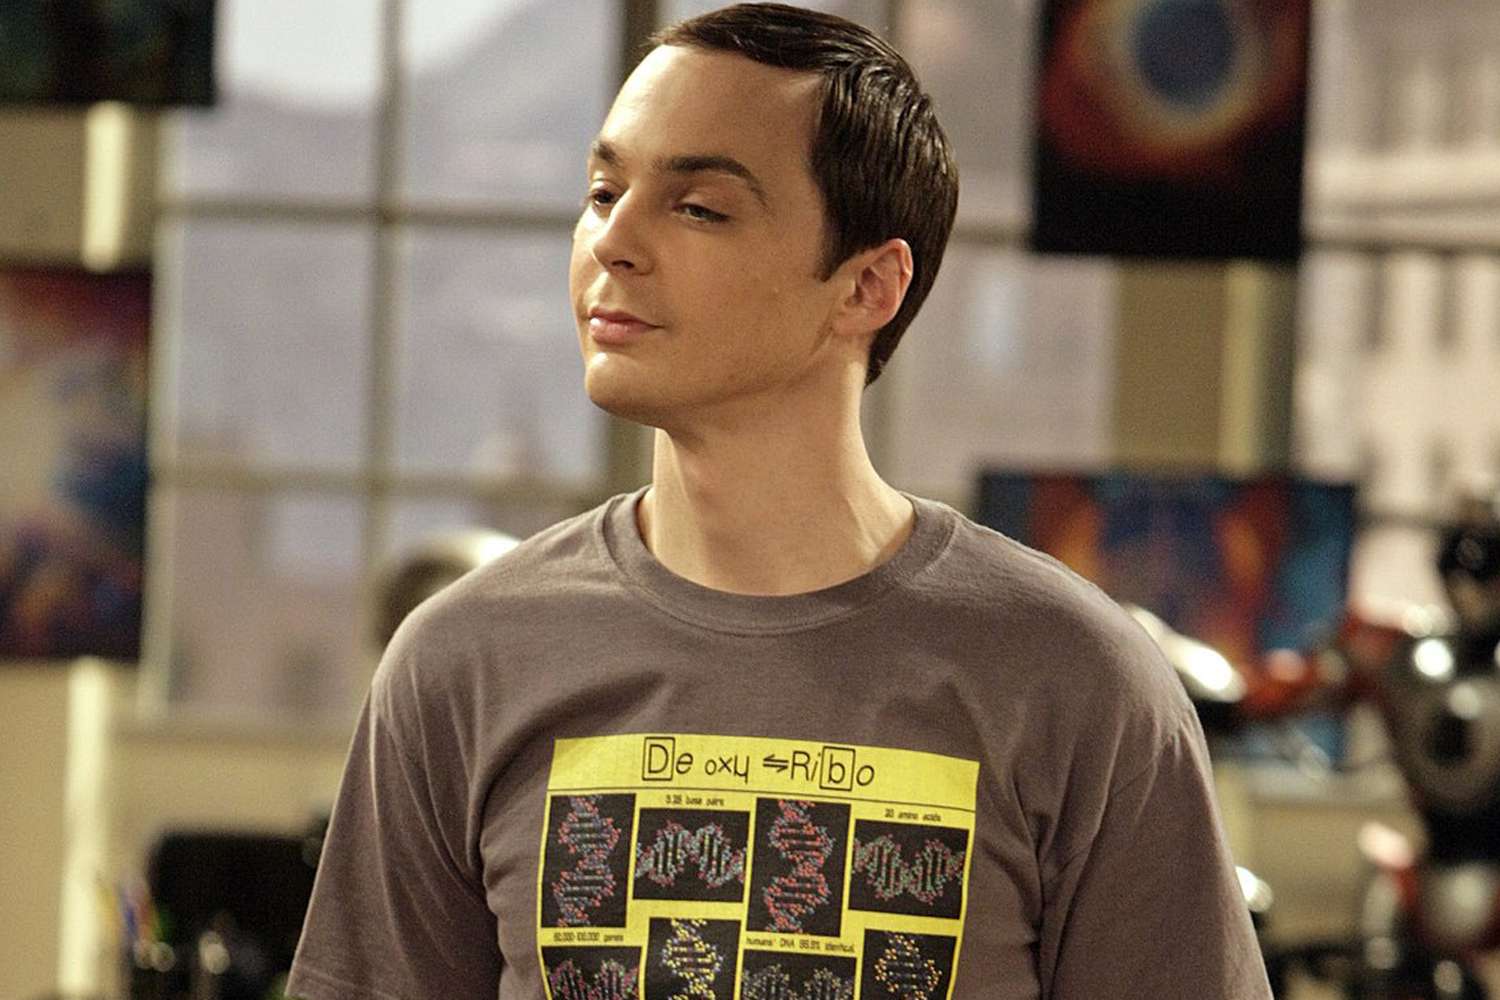 Jim Parsons Says Reprising His“ Big Bang Theory” Role for “Young Sheldon” Finale Was 'a Gift' (Exclusive)